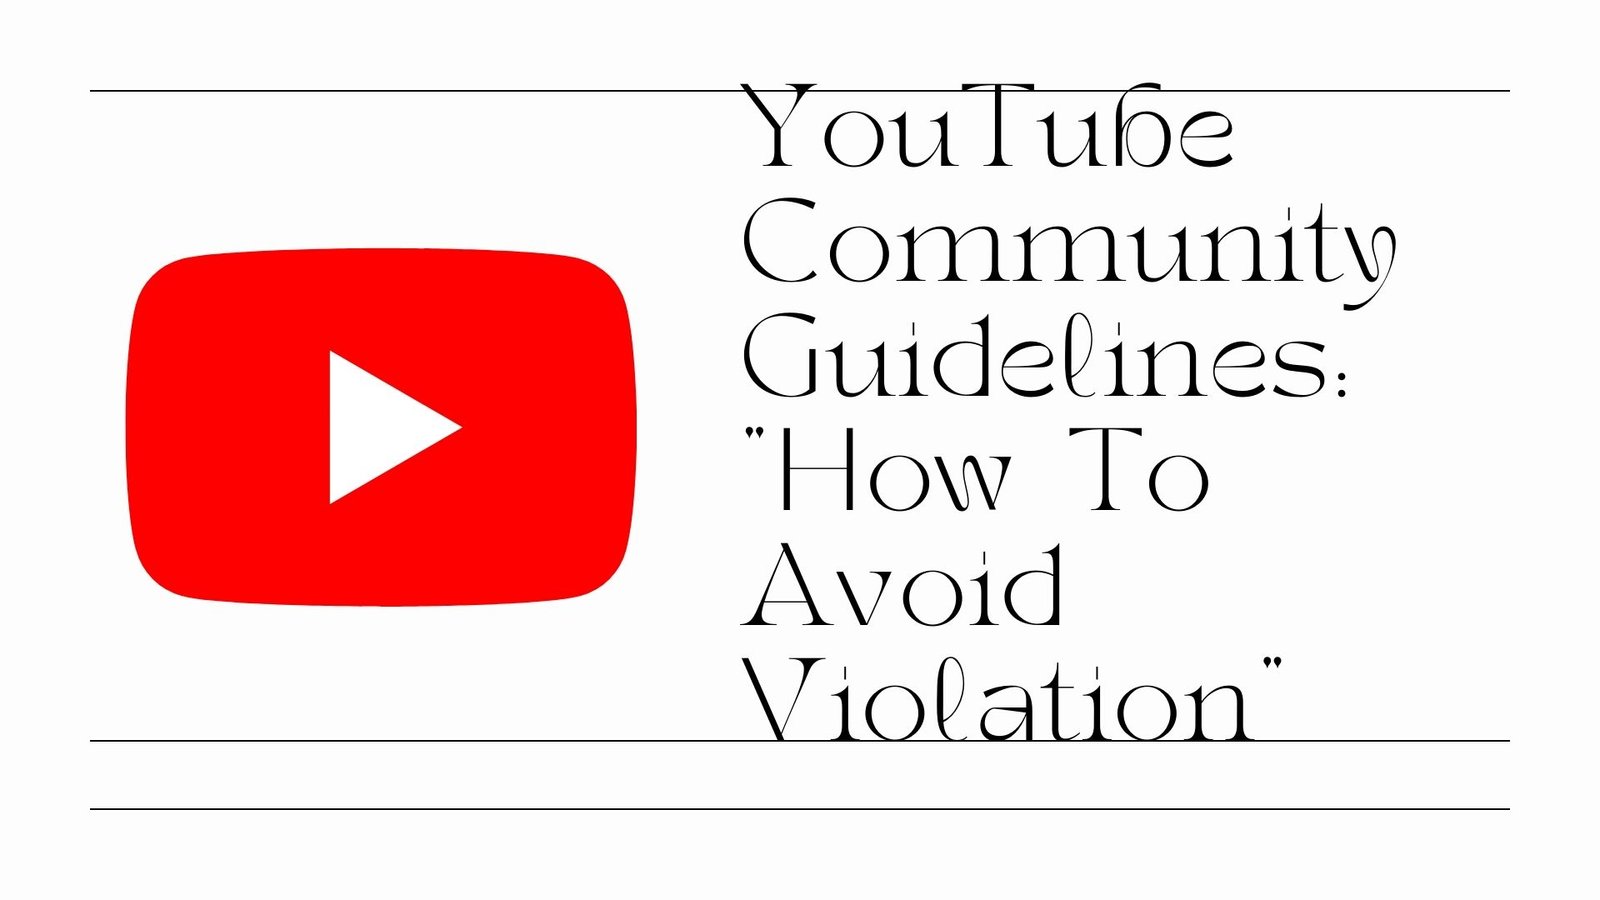 YouTube Community Guidelines: “How  To Avoid Violation”